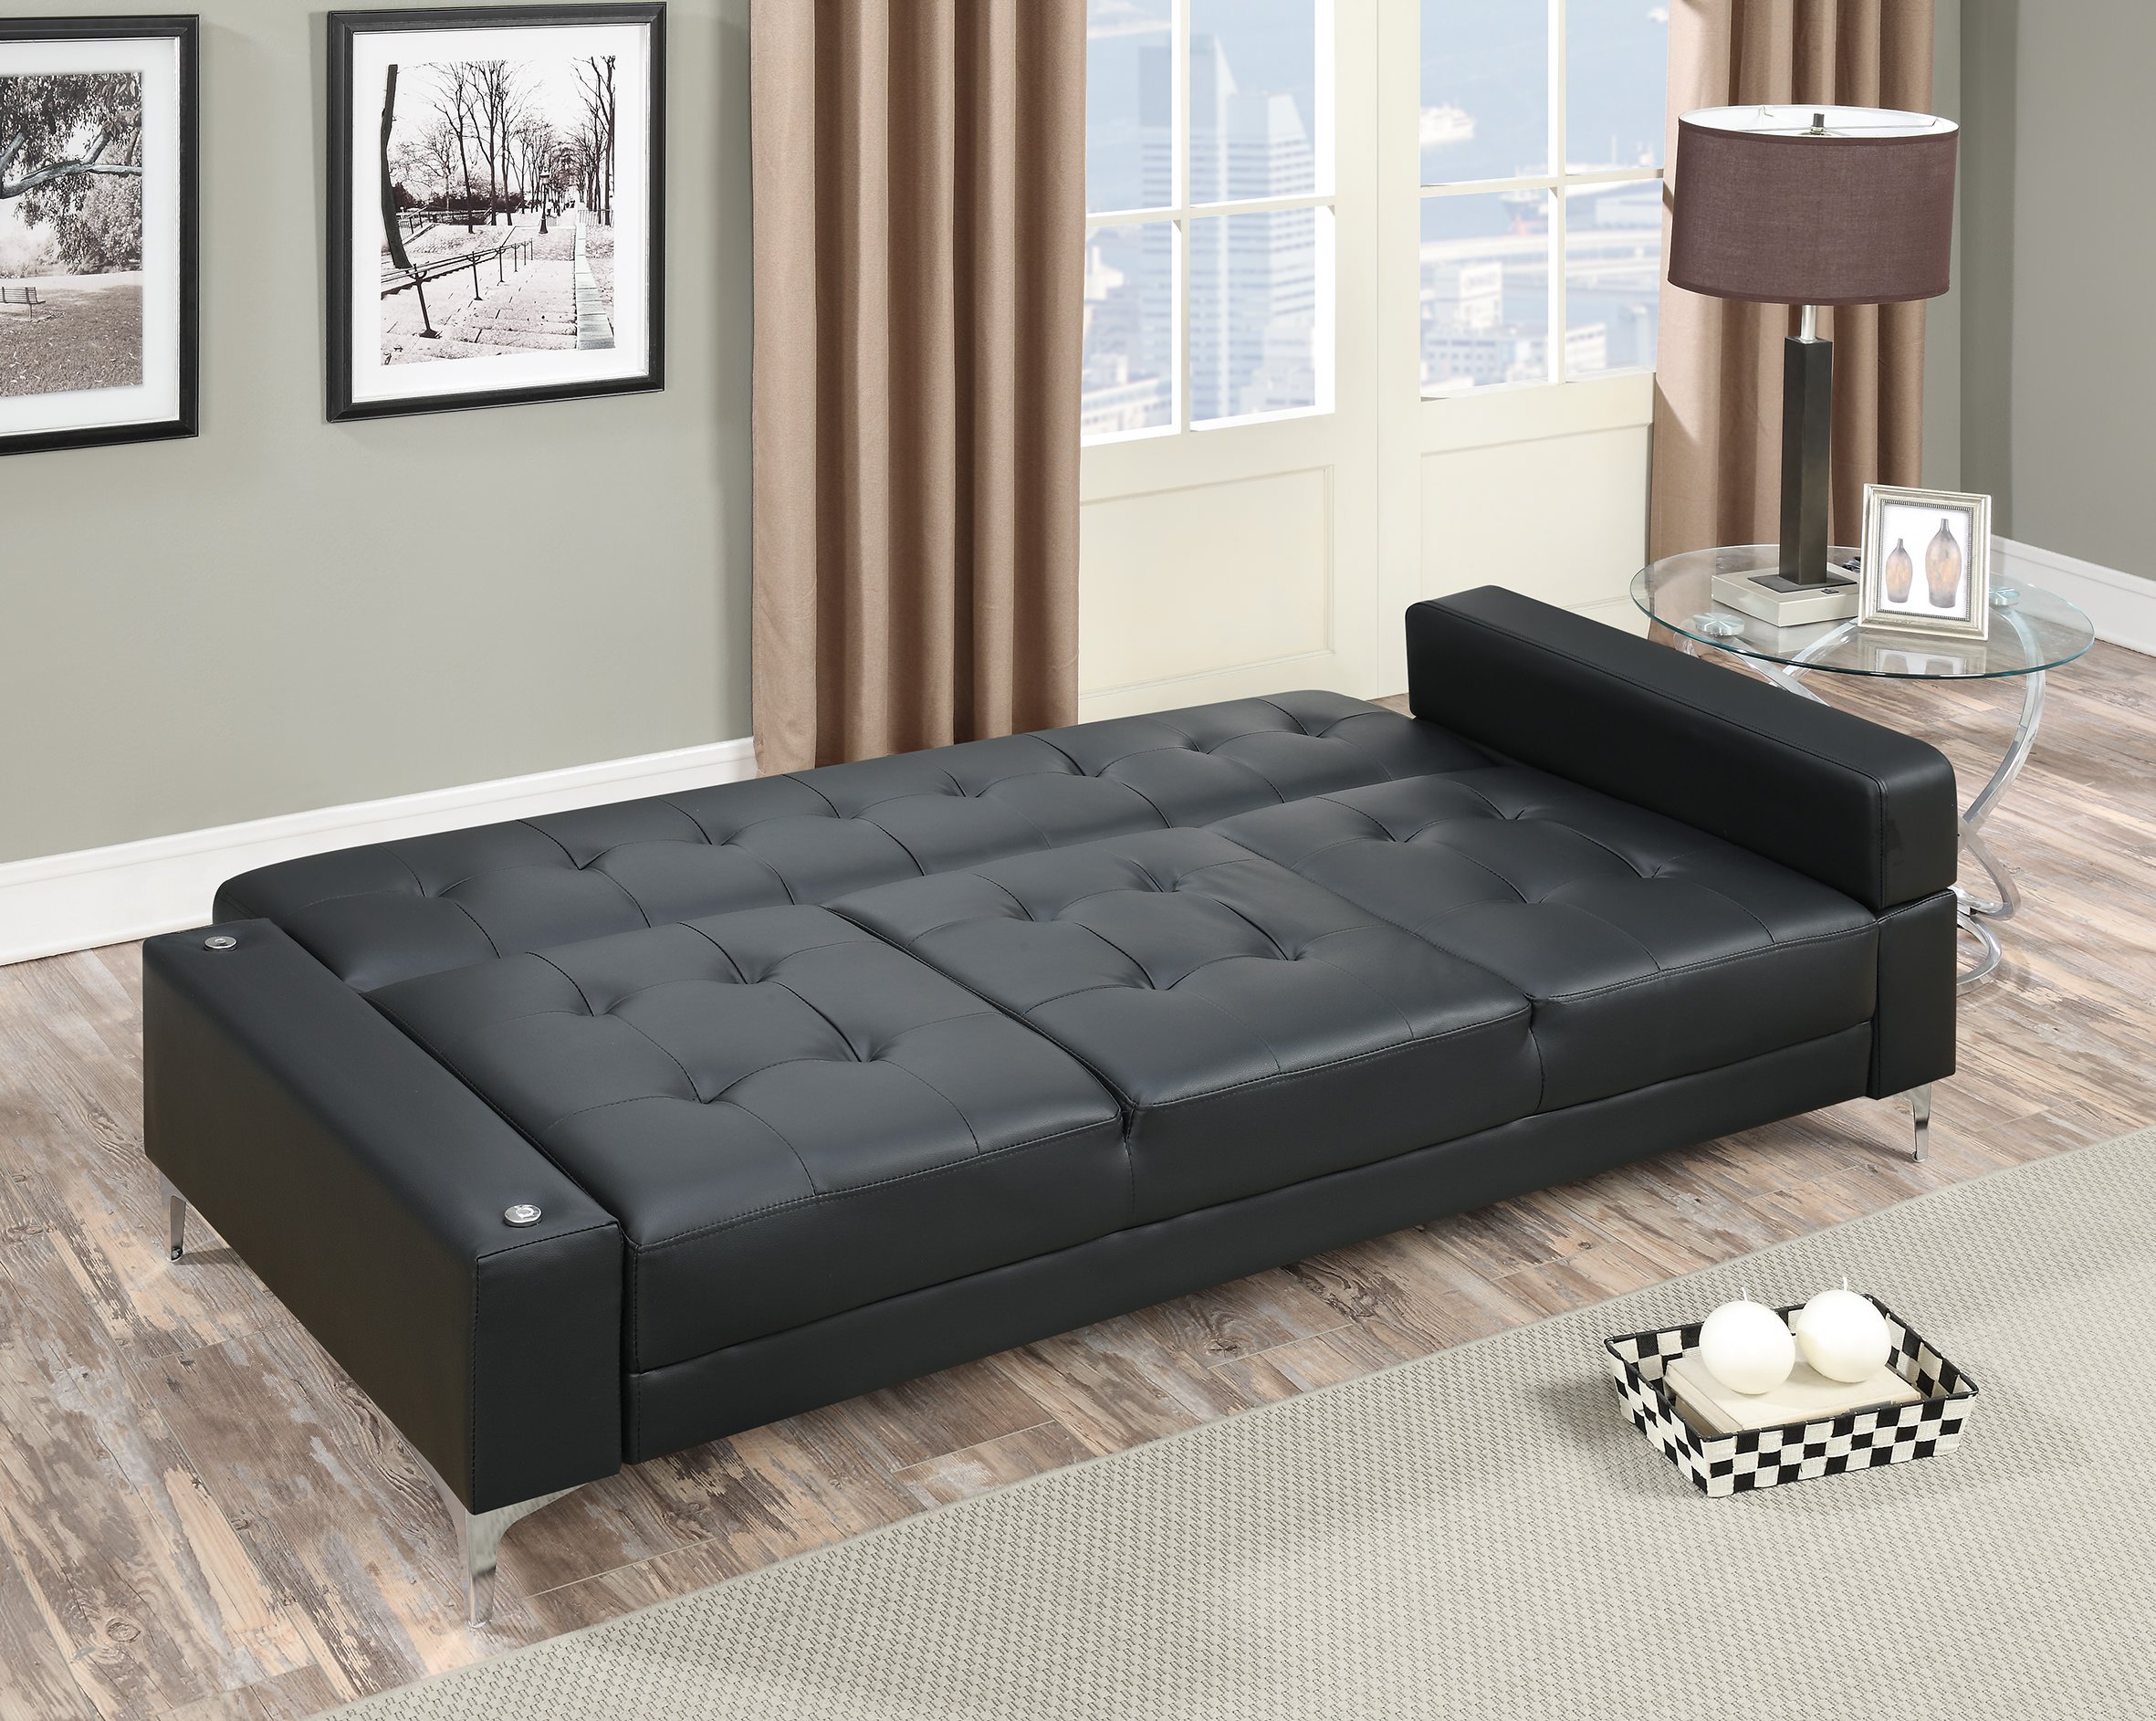 Install sofa convertible bed to serve dual functions